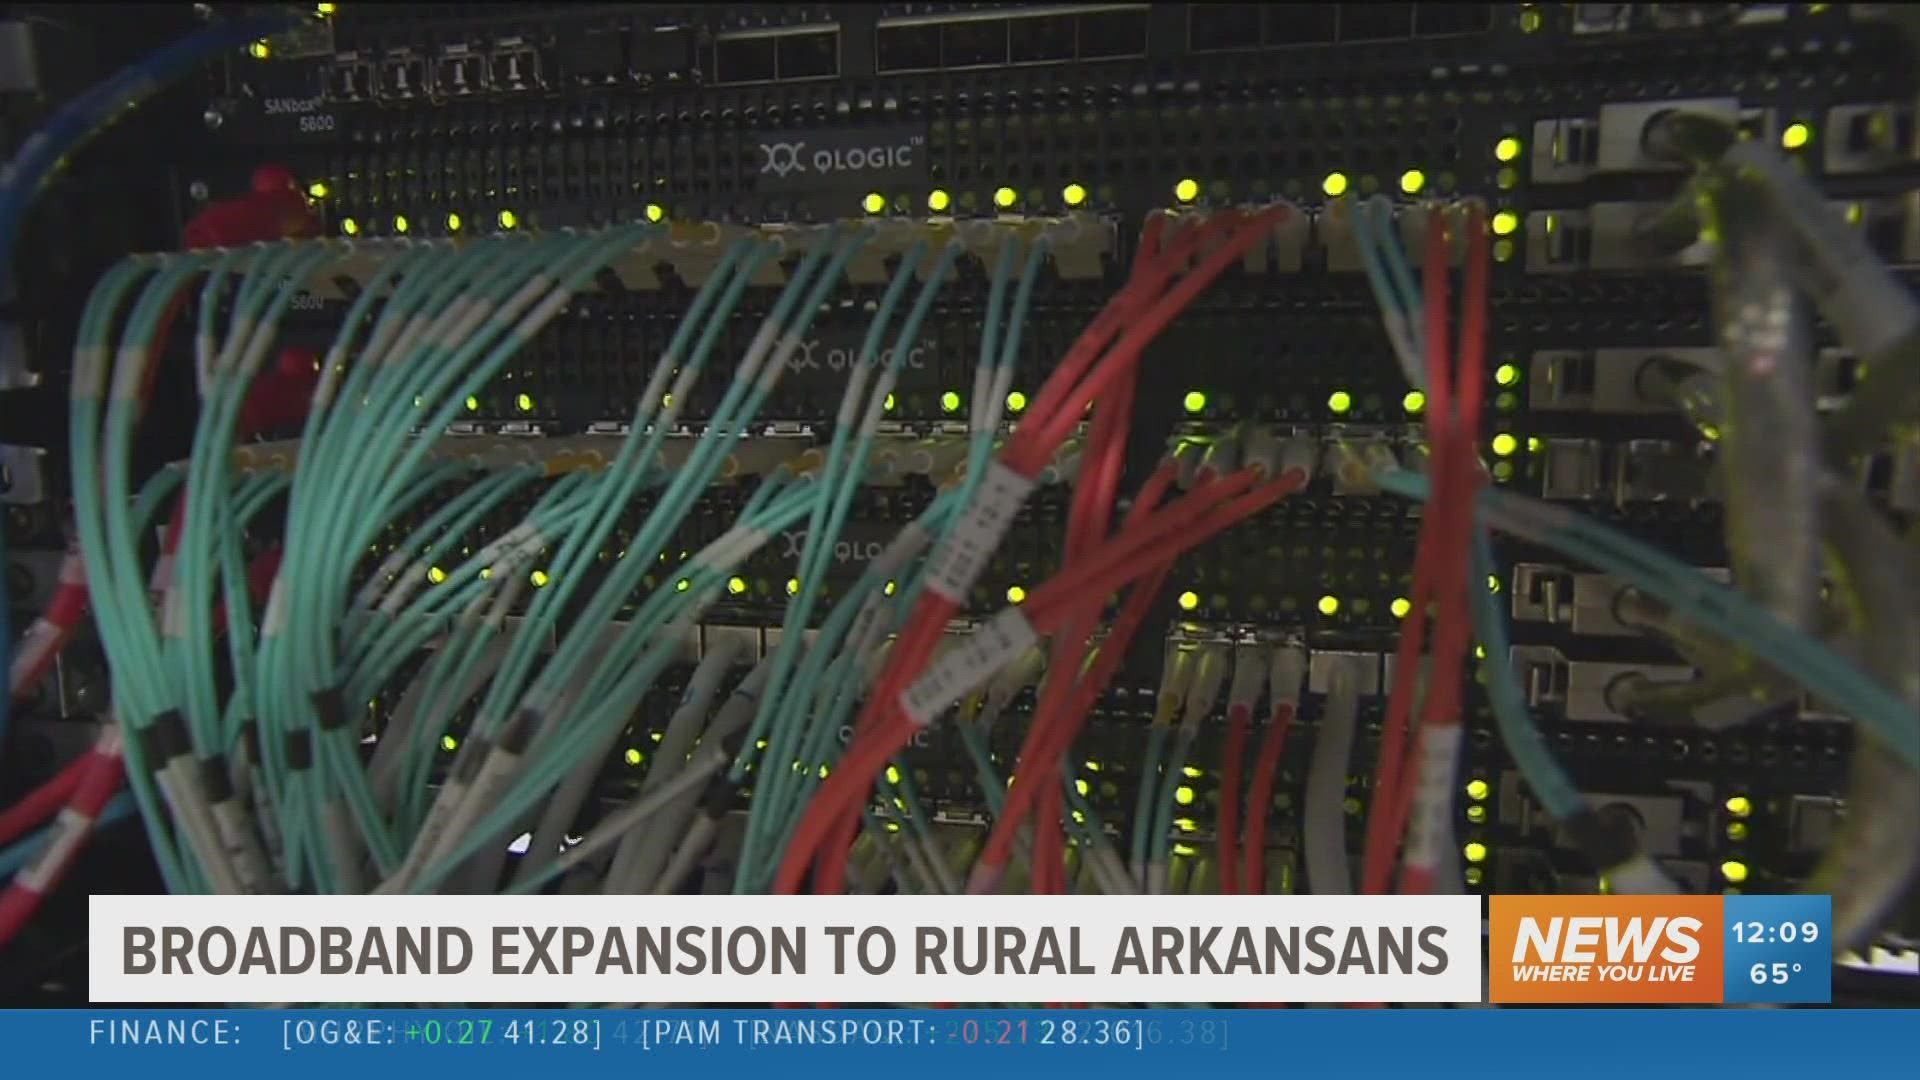 Diamond State’s network will cover more than 64% of Arkansas with more than 50,000 miles of fiber.